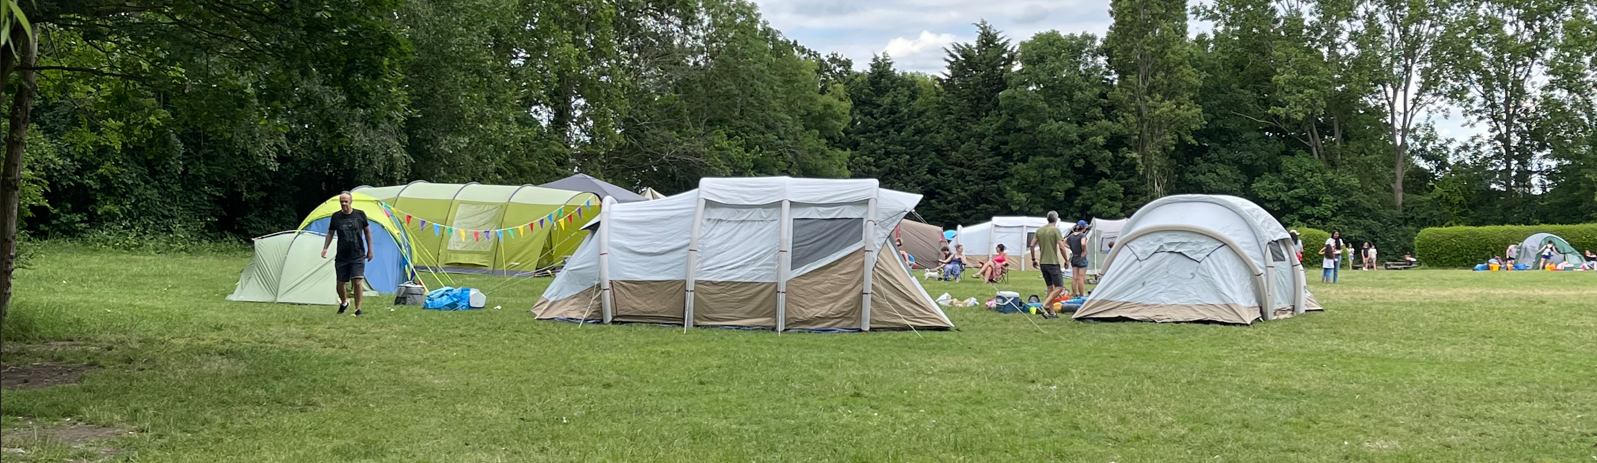 Tents in the main field at The Fort